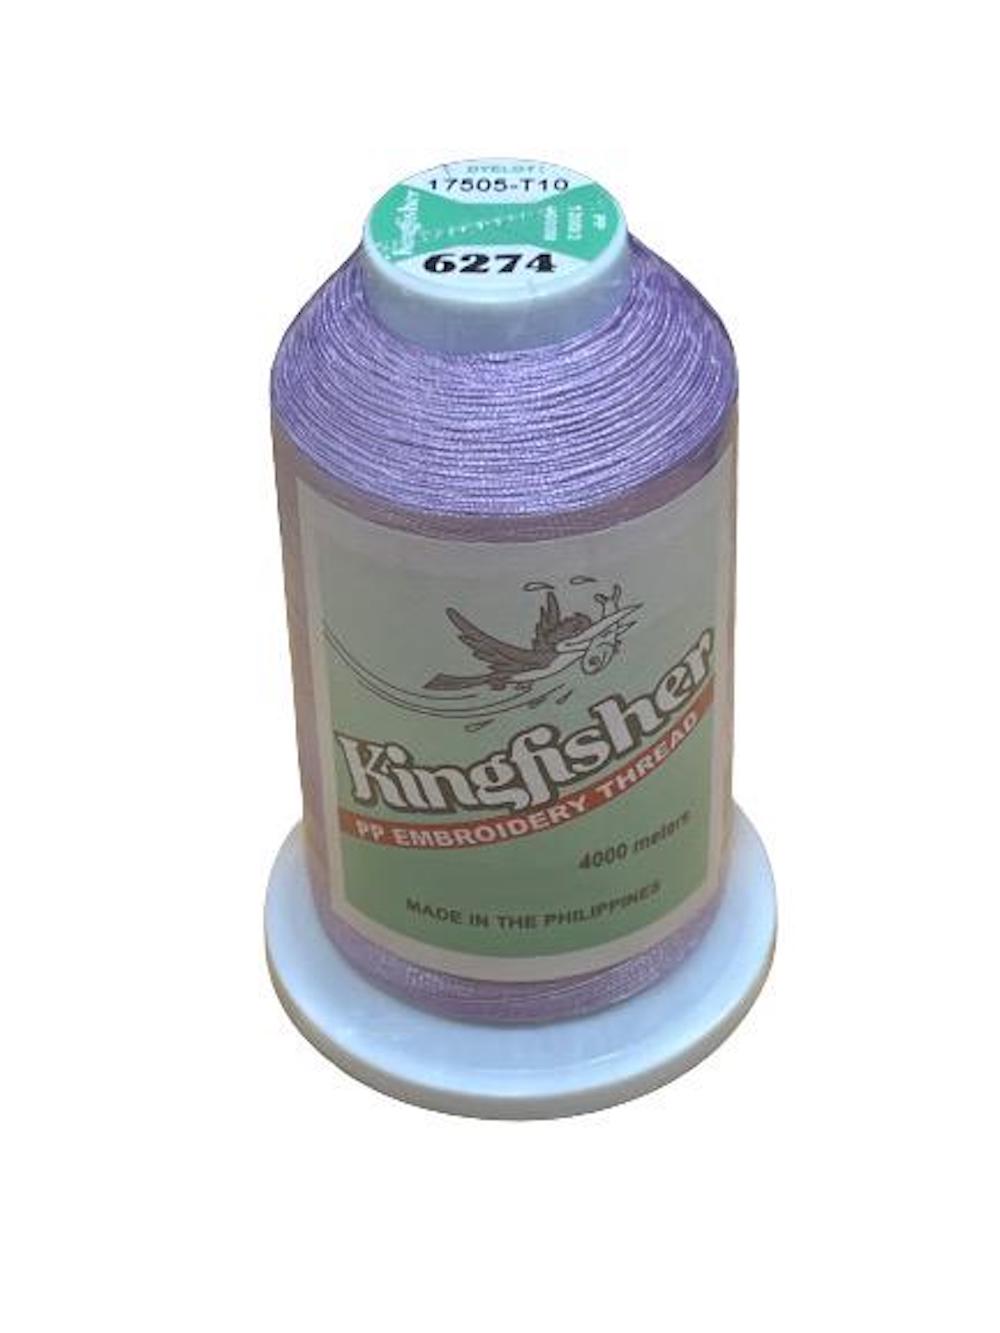 King Fisher Embroidery Thread 4000m 6274 - MY SEWING MALL